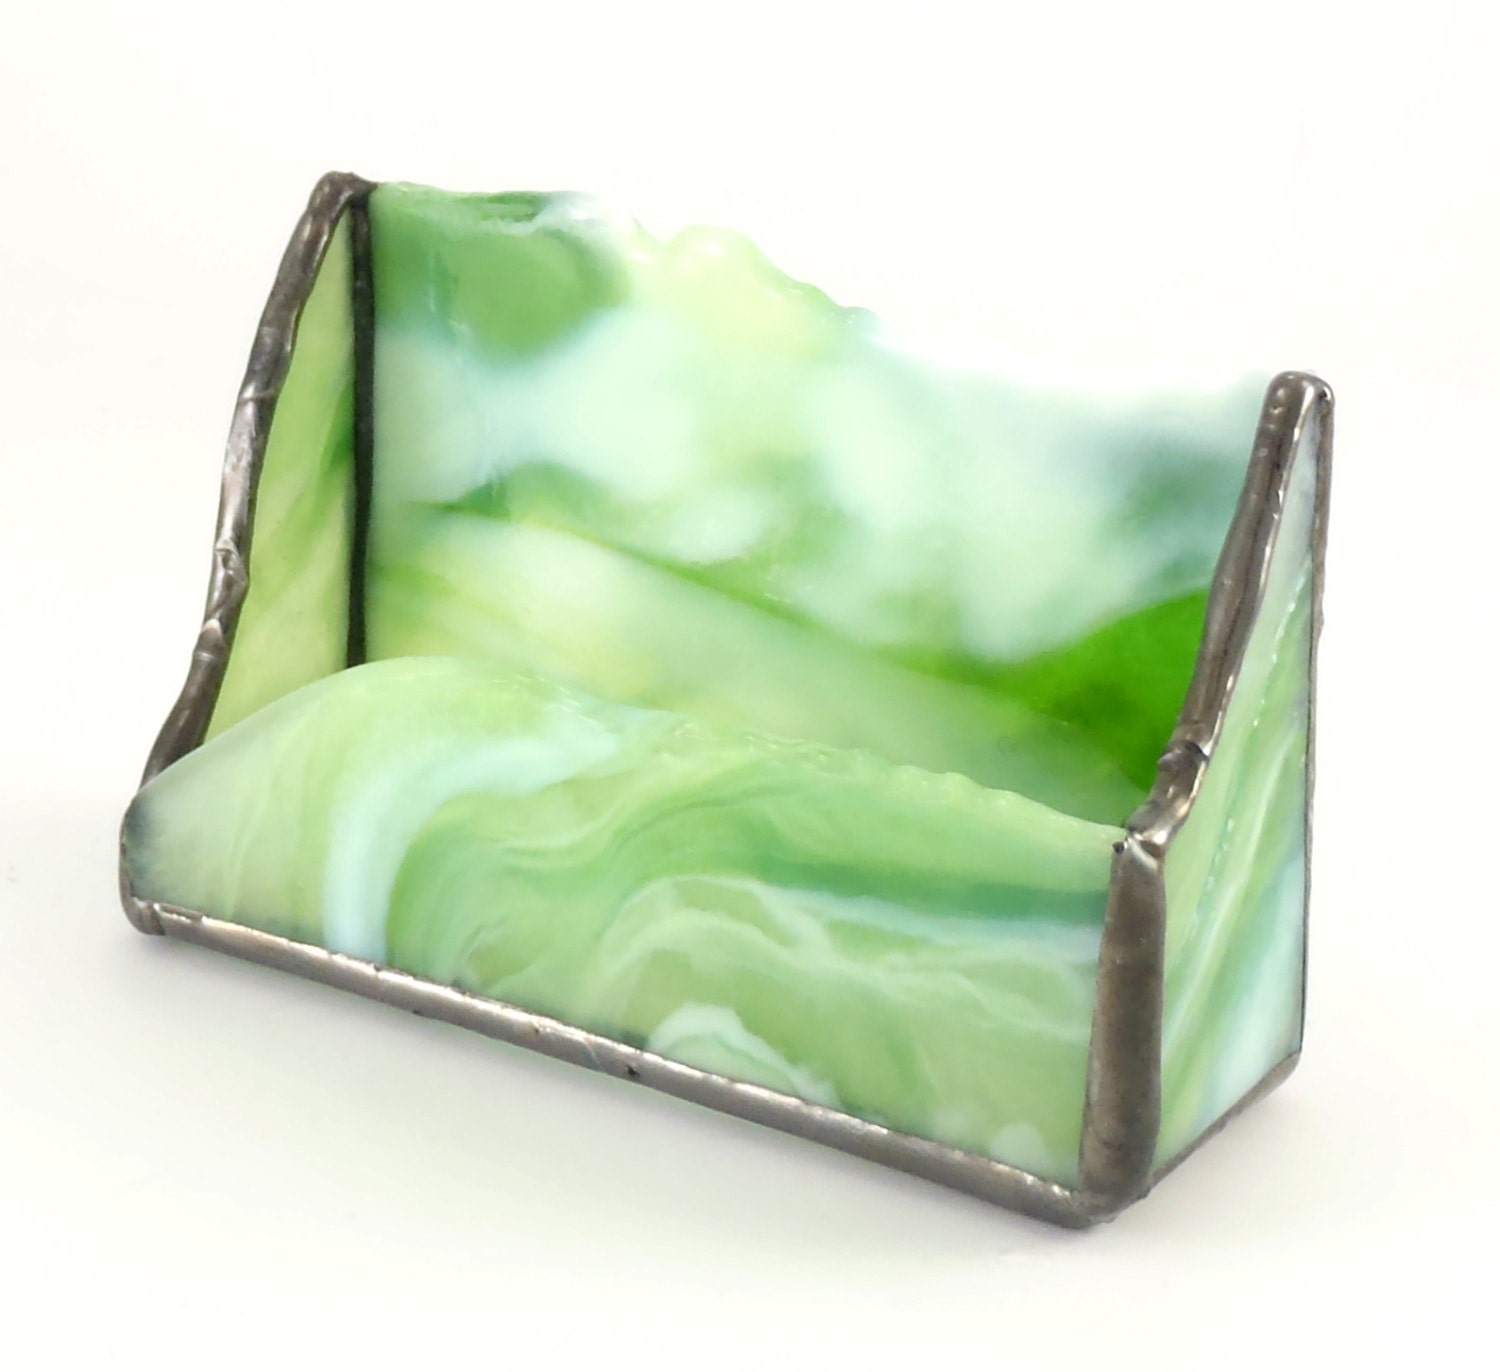 Unique Desktop Business Card Holder Green Stained Glass